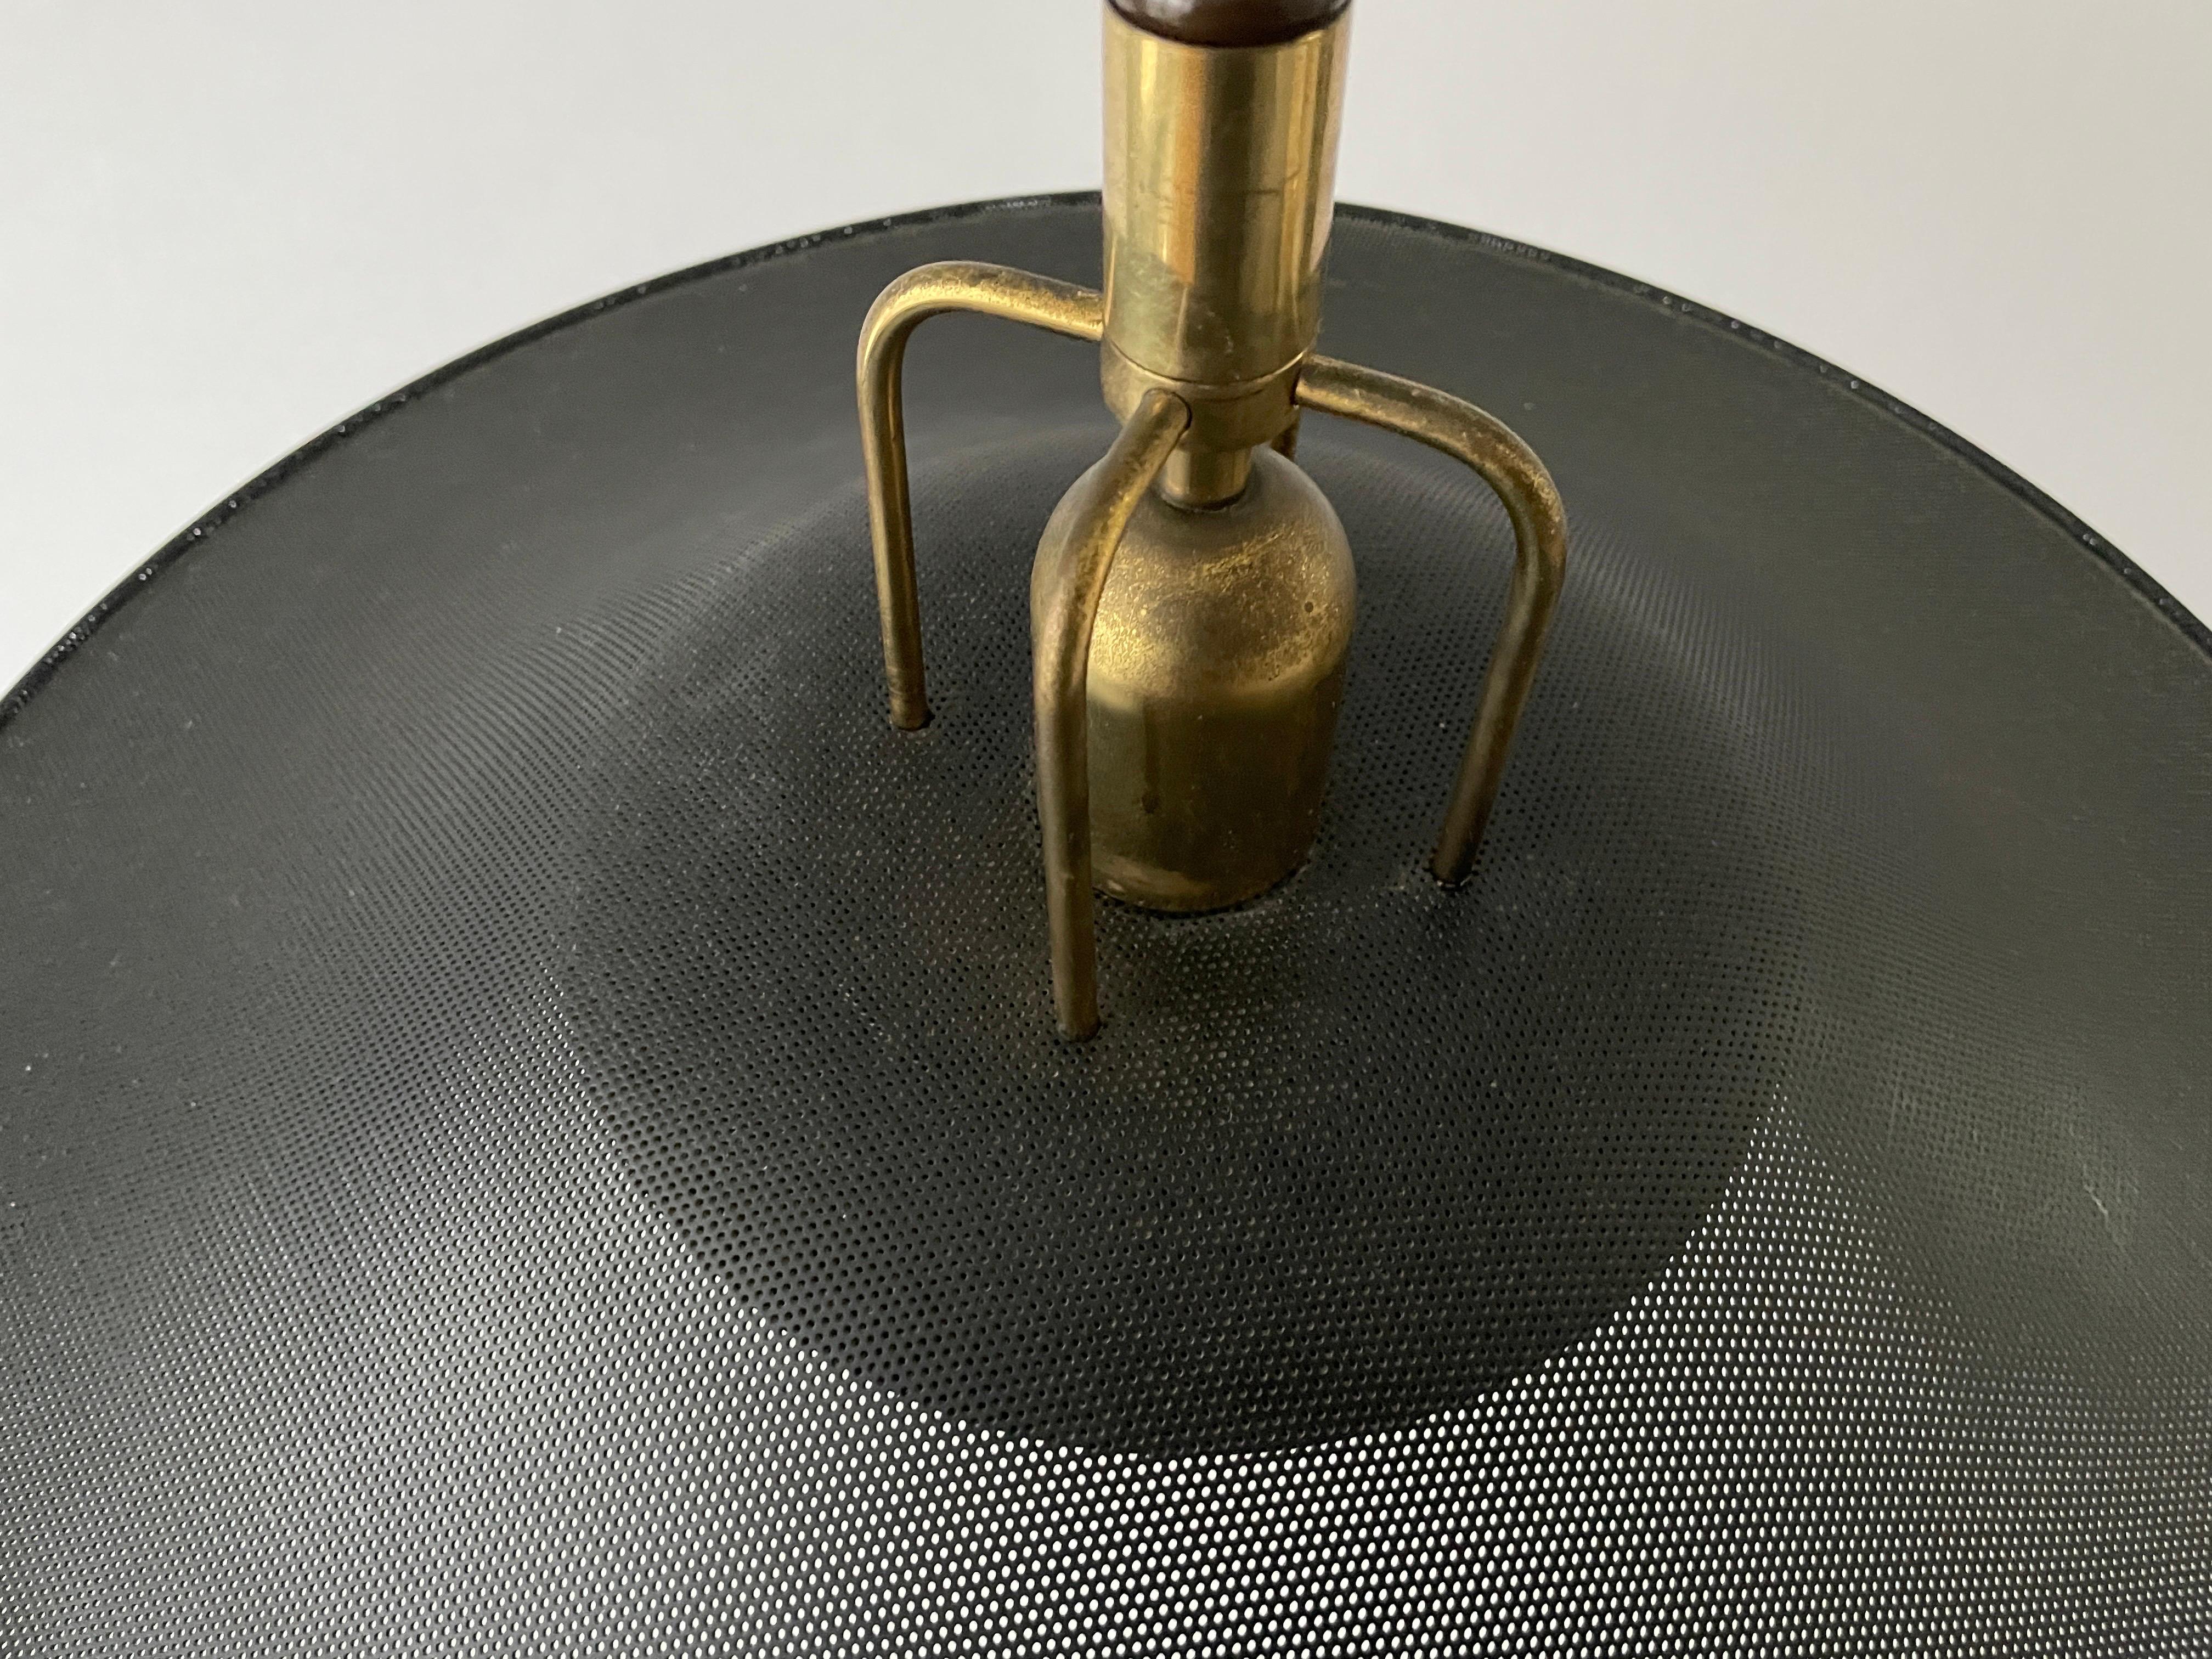 Black-Gold Metal Adjustable Pendant Lamp by Cosack, 1970s, Germany For Sale 3